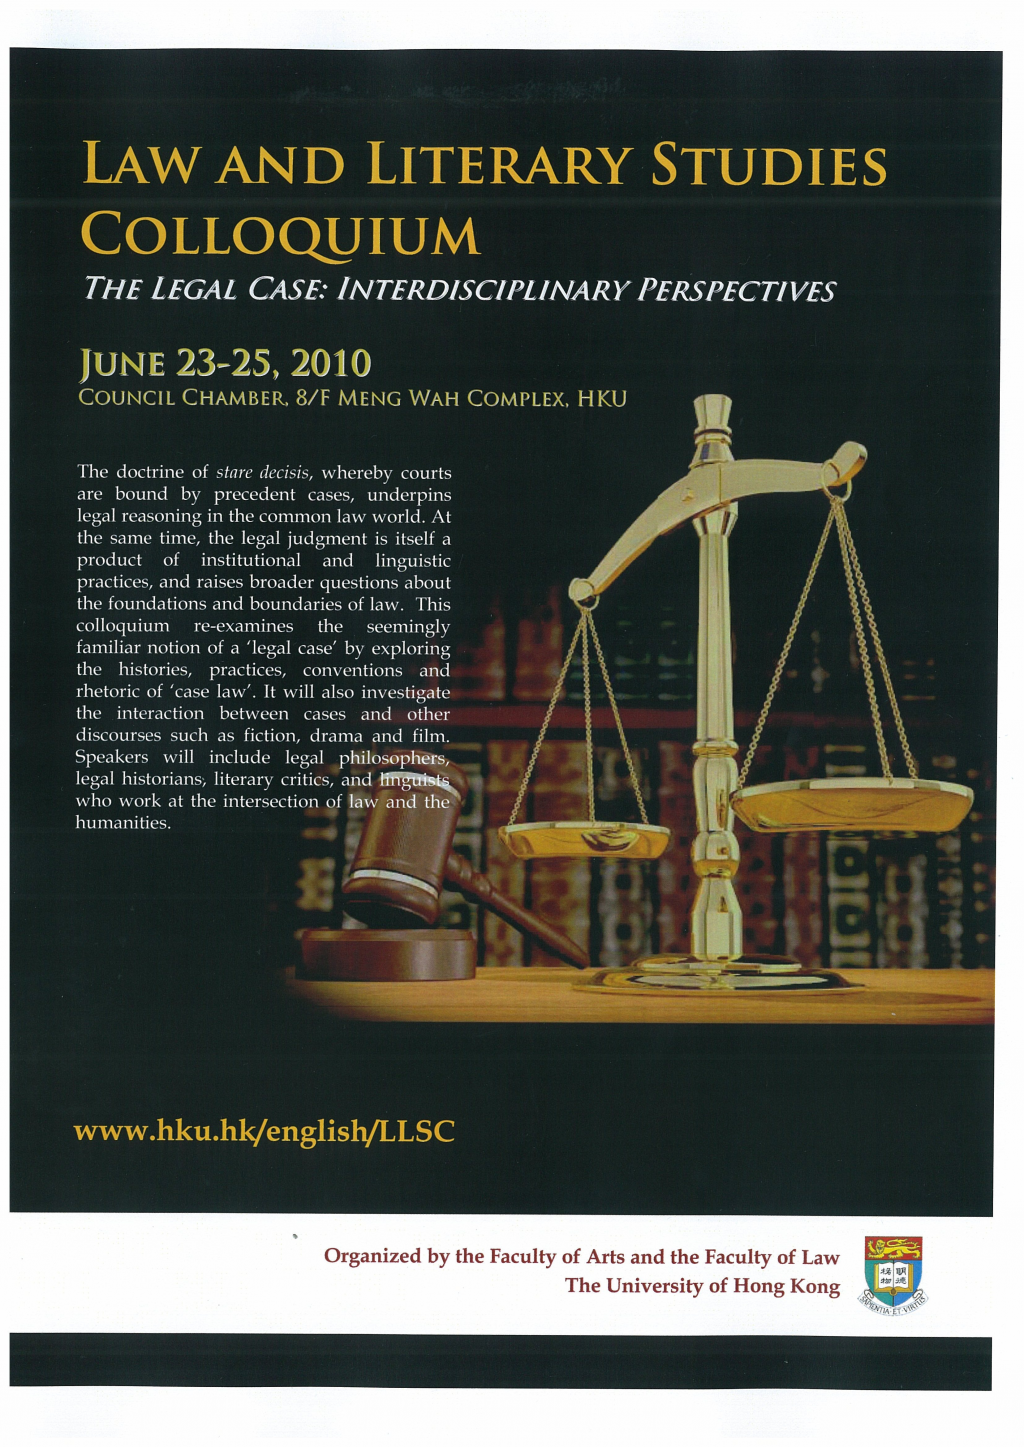 The Legal Case: Interdisciplinary Perspectives A Colloquium on Law and Literature